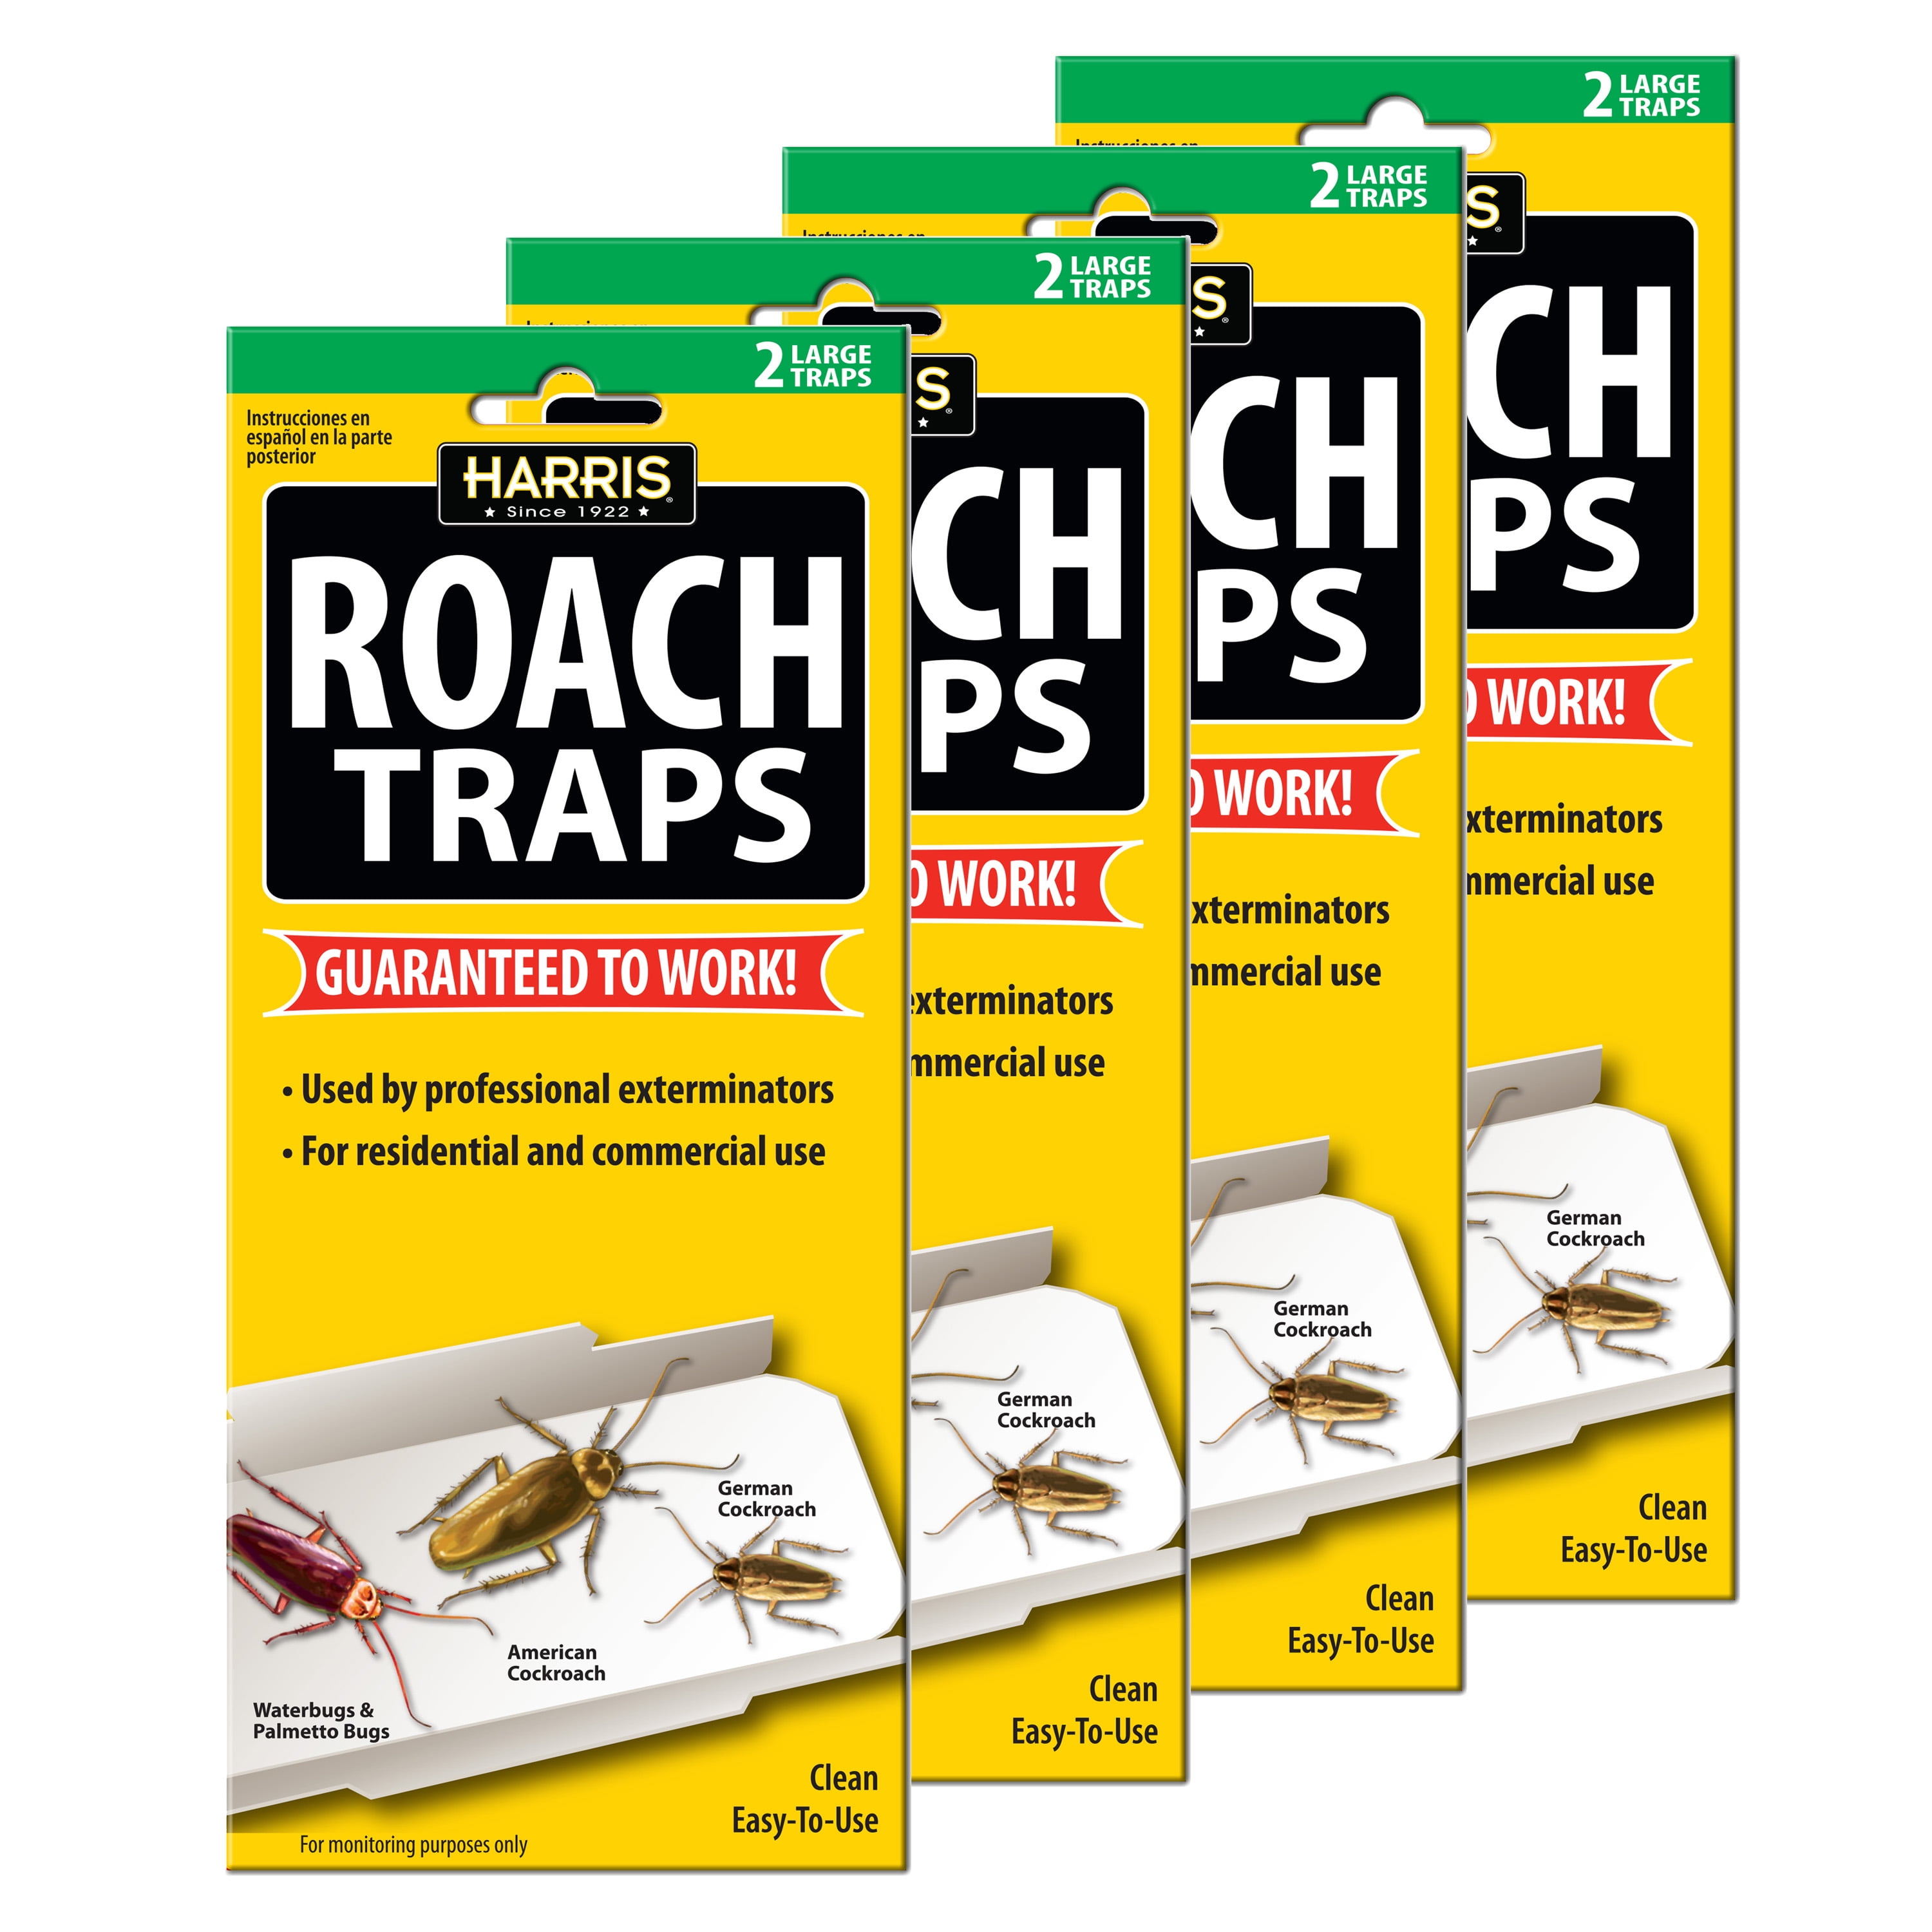 DIY Mouse Trap Box: How to Make an Effective, Eco-Friendly Trap - Recon  Pest Services